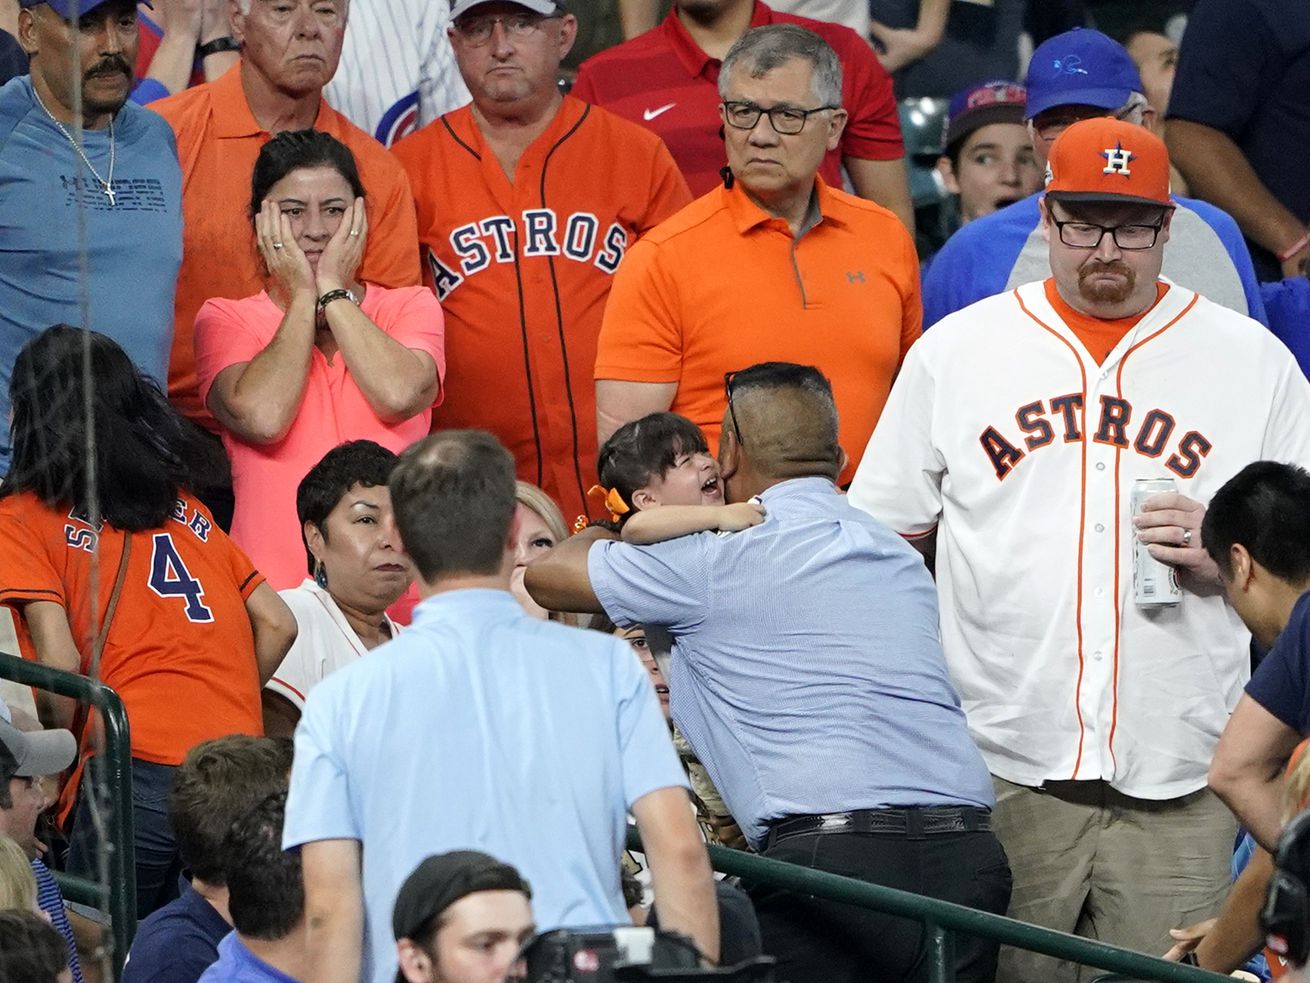 A young child is carried from the stands after being injured by a foul ball off the bat of Chicago Cubs’ Albert Almora Jr. during the fourth inning of a baseball game against the Houston Astros Wednesday, May 29, 2019, in Houston. (AP Photo/David J. Phillip)